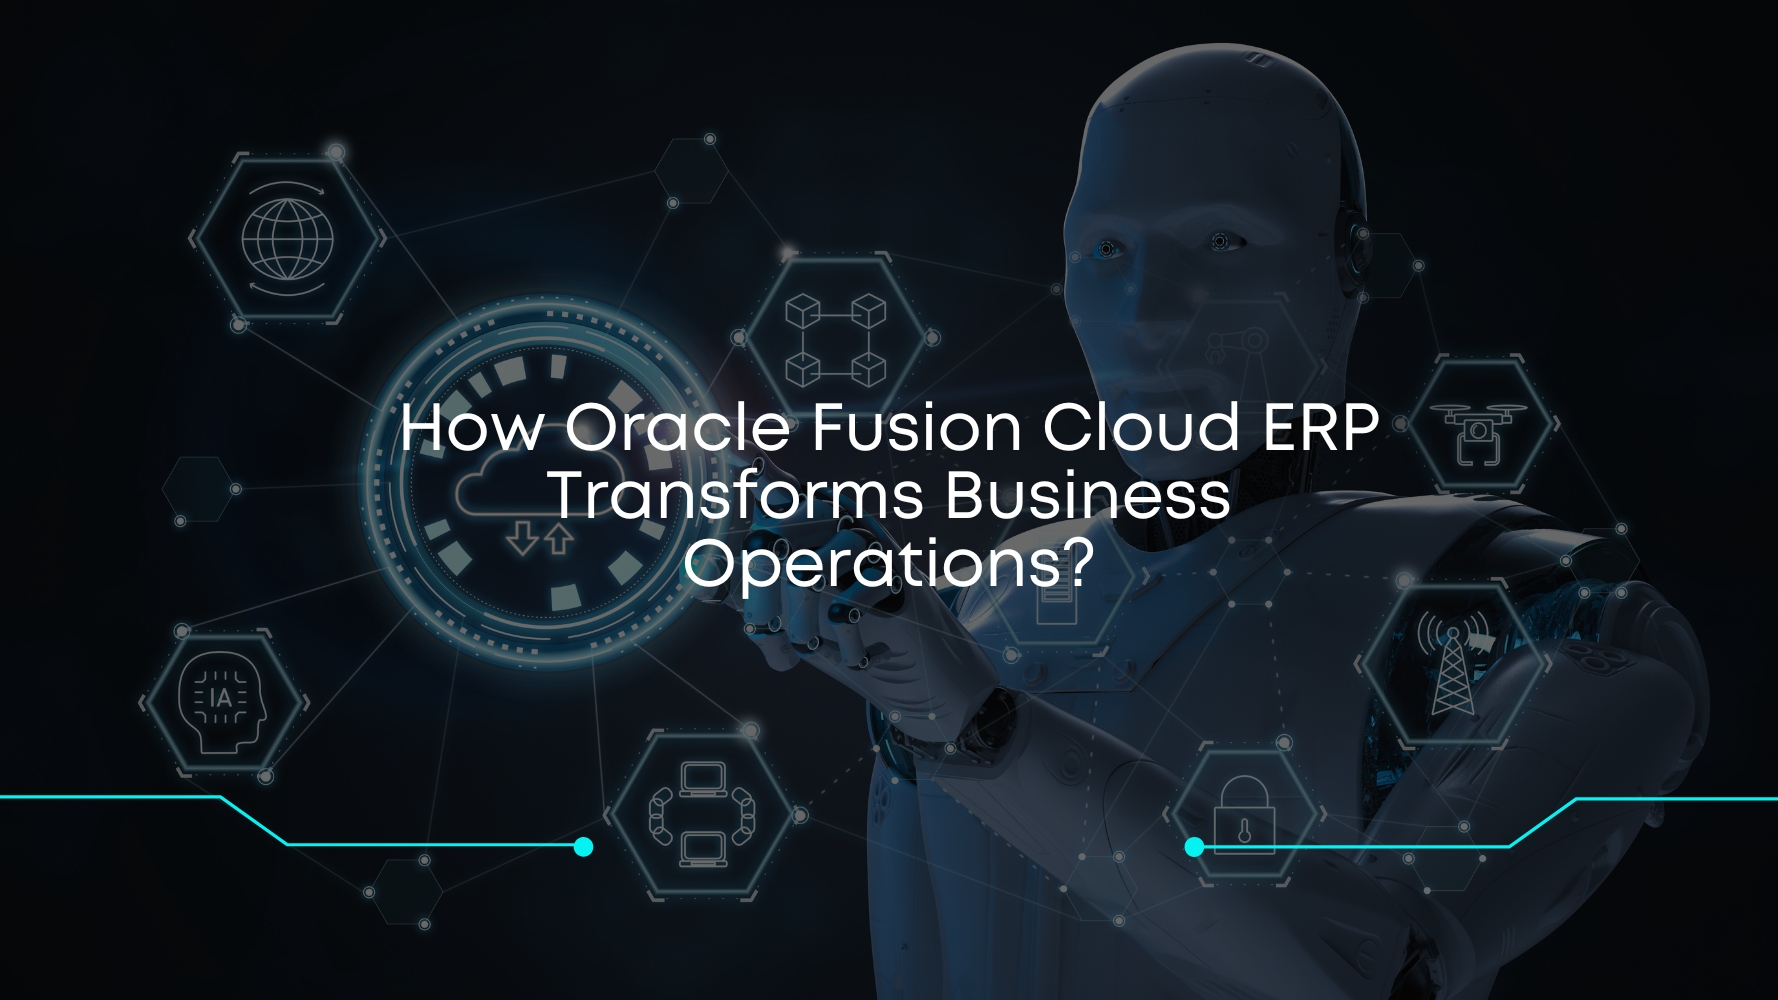 How-Oracle-Fusion-Cloud-ERP-Transforms-Business-Operations_.jpg